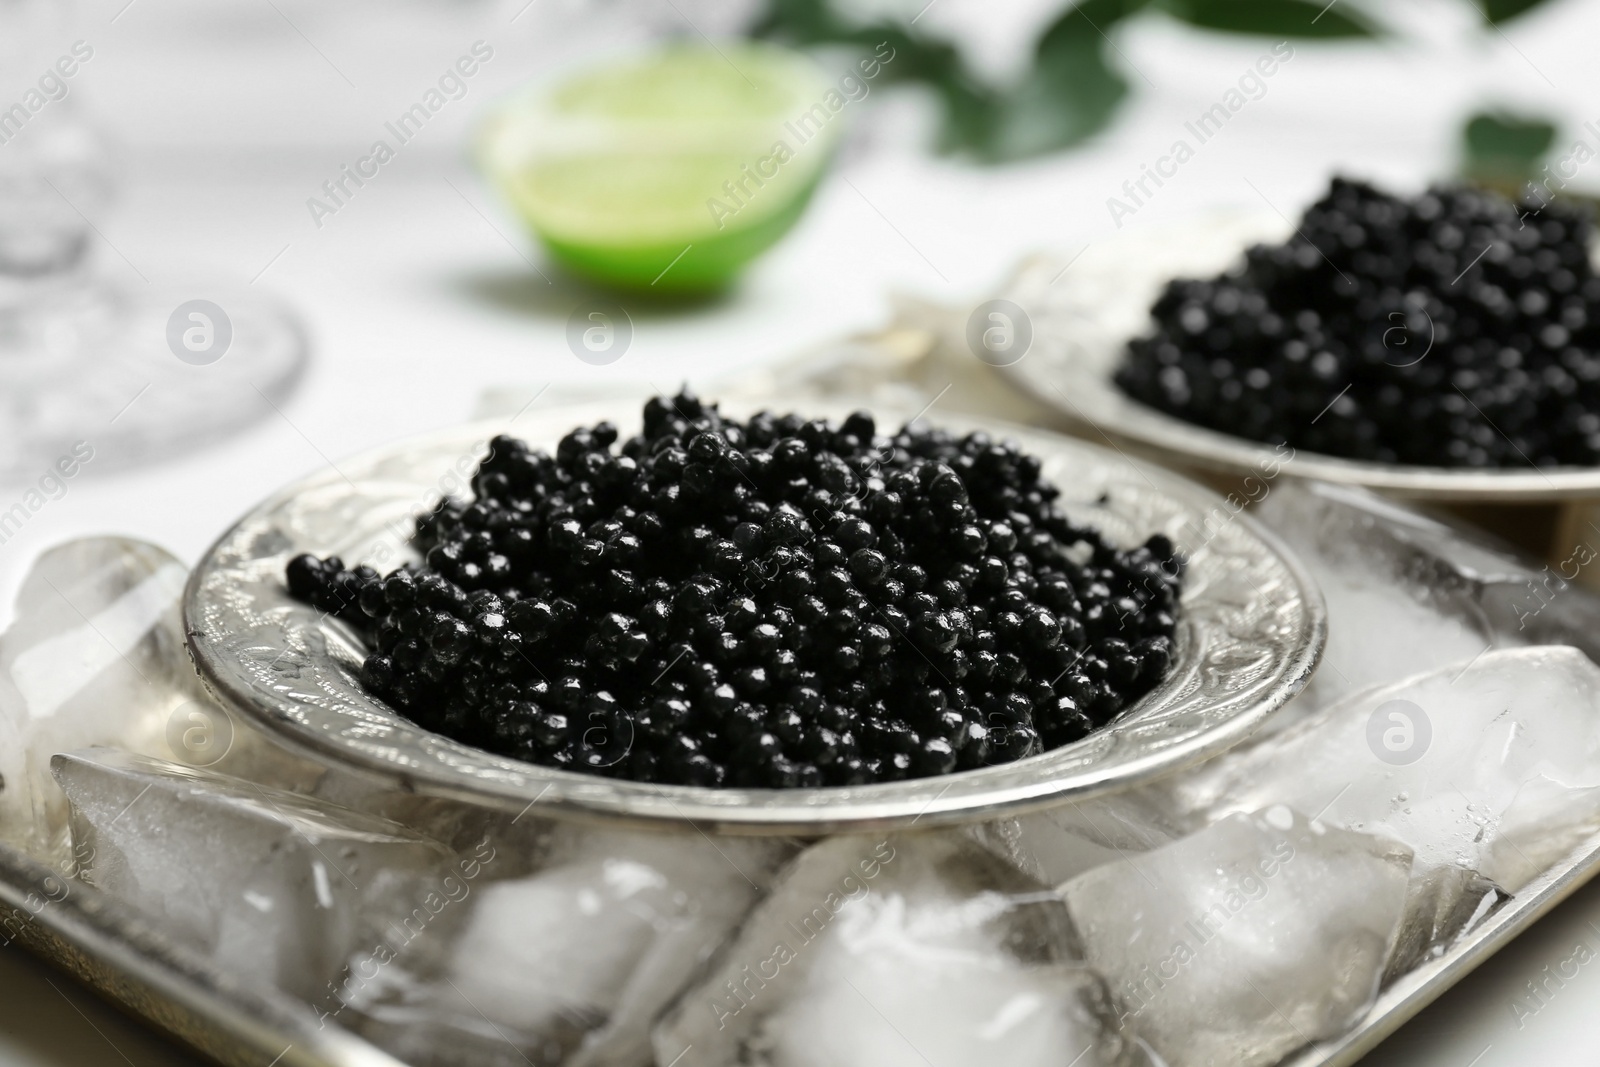 Photo of Plate with black caviar served with ice cubes on metal tray